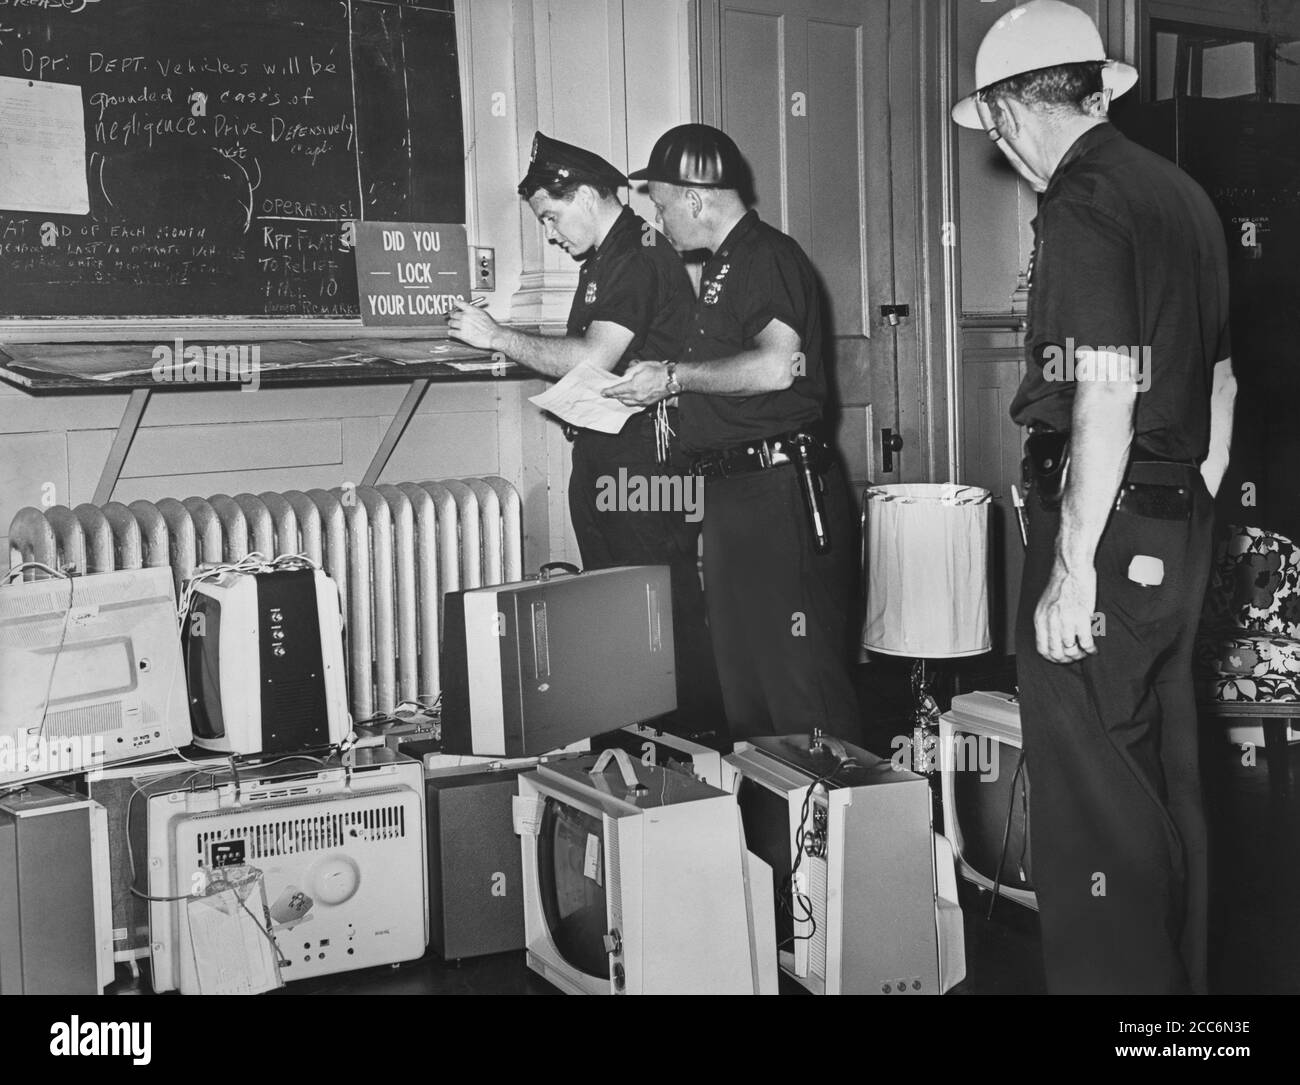 Police Officers Tom McMahon, David Ablett, and Robert Fales documenting confiscated stolen items after night of rioting due to fatal shooting of Teen James Powell by Police Officer Lt. Thomas Gilligan, Brooklyn, New York, USA, John Bottega, World Telegram & Sun, July 22, 1964 Stock Photo